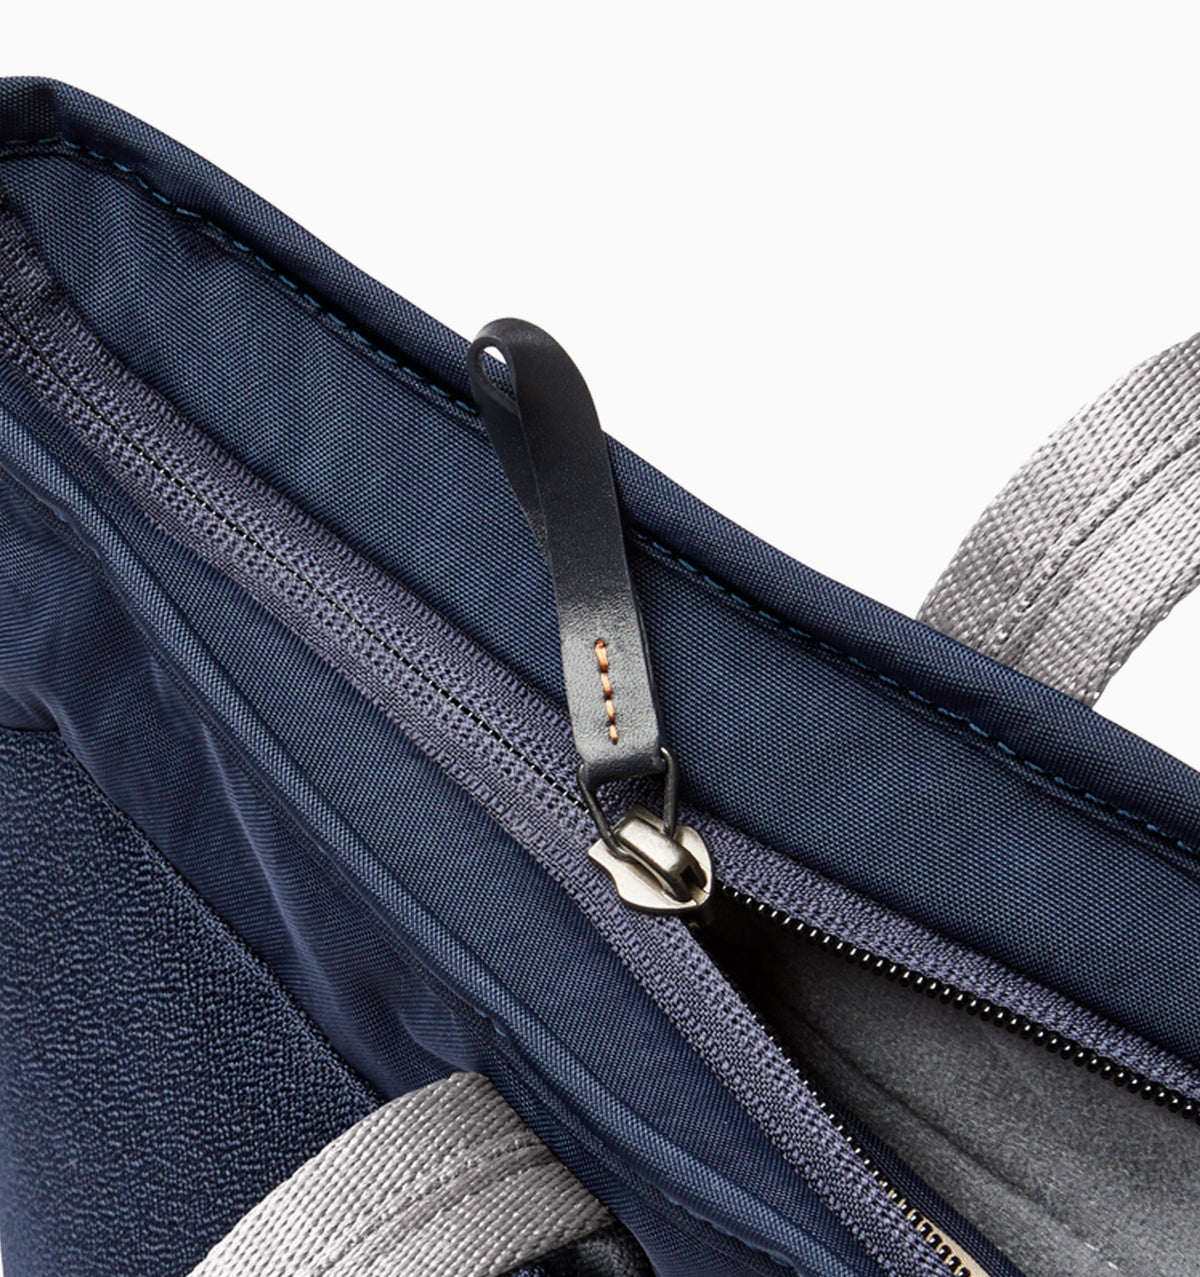 Bellroy 13" Tokyo Tote 15L (2nd Edition) - Navy